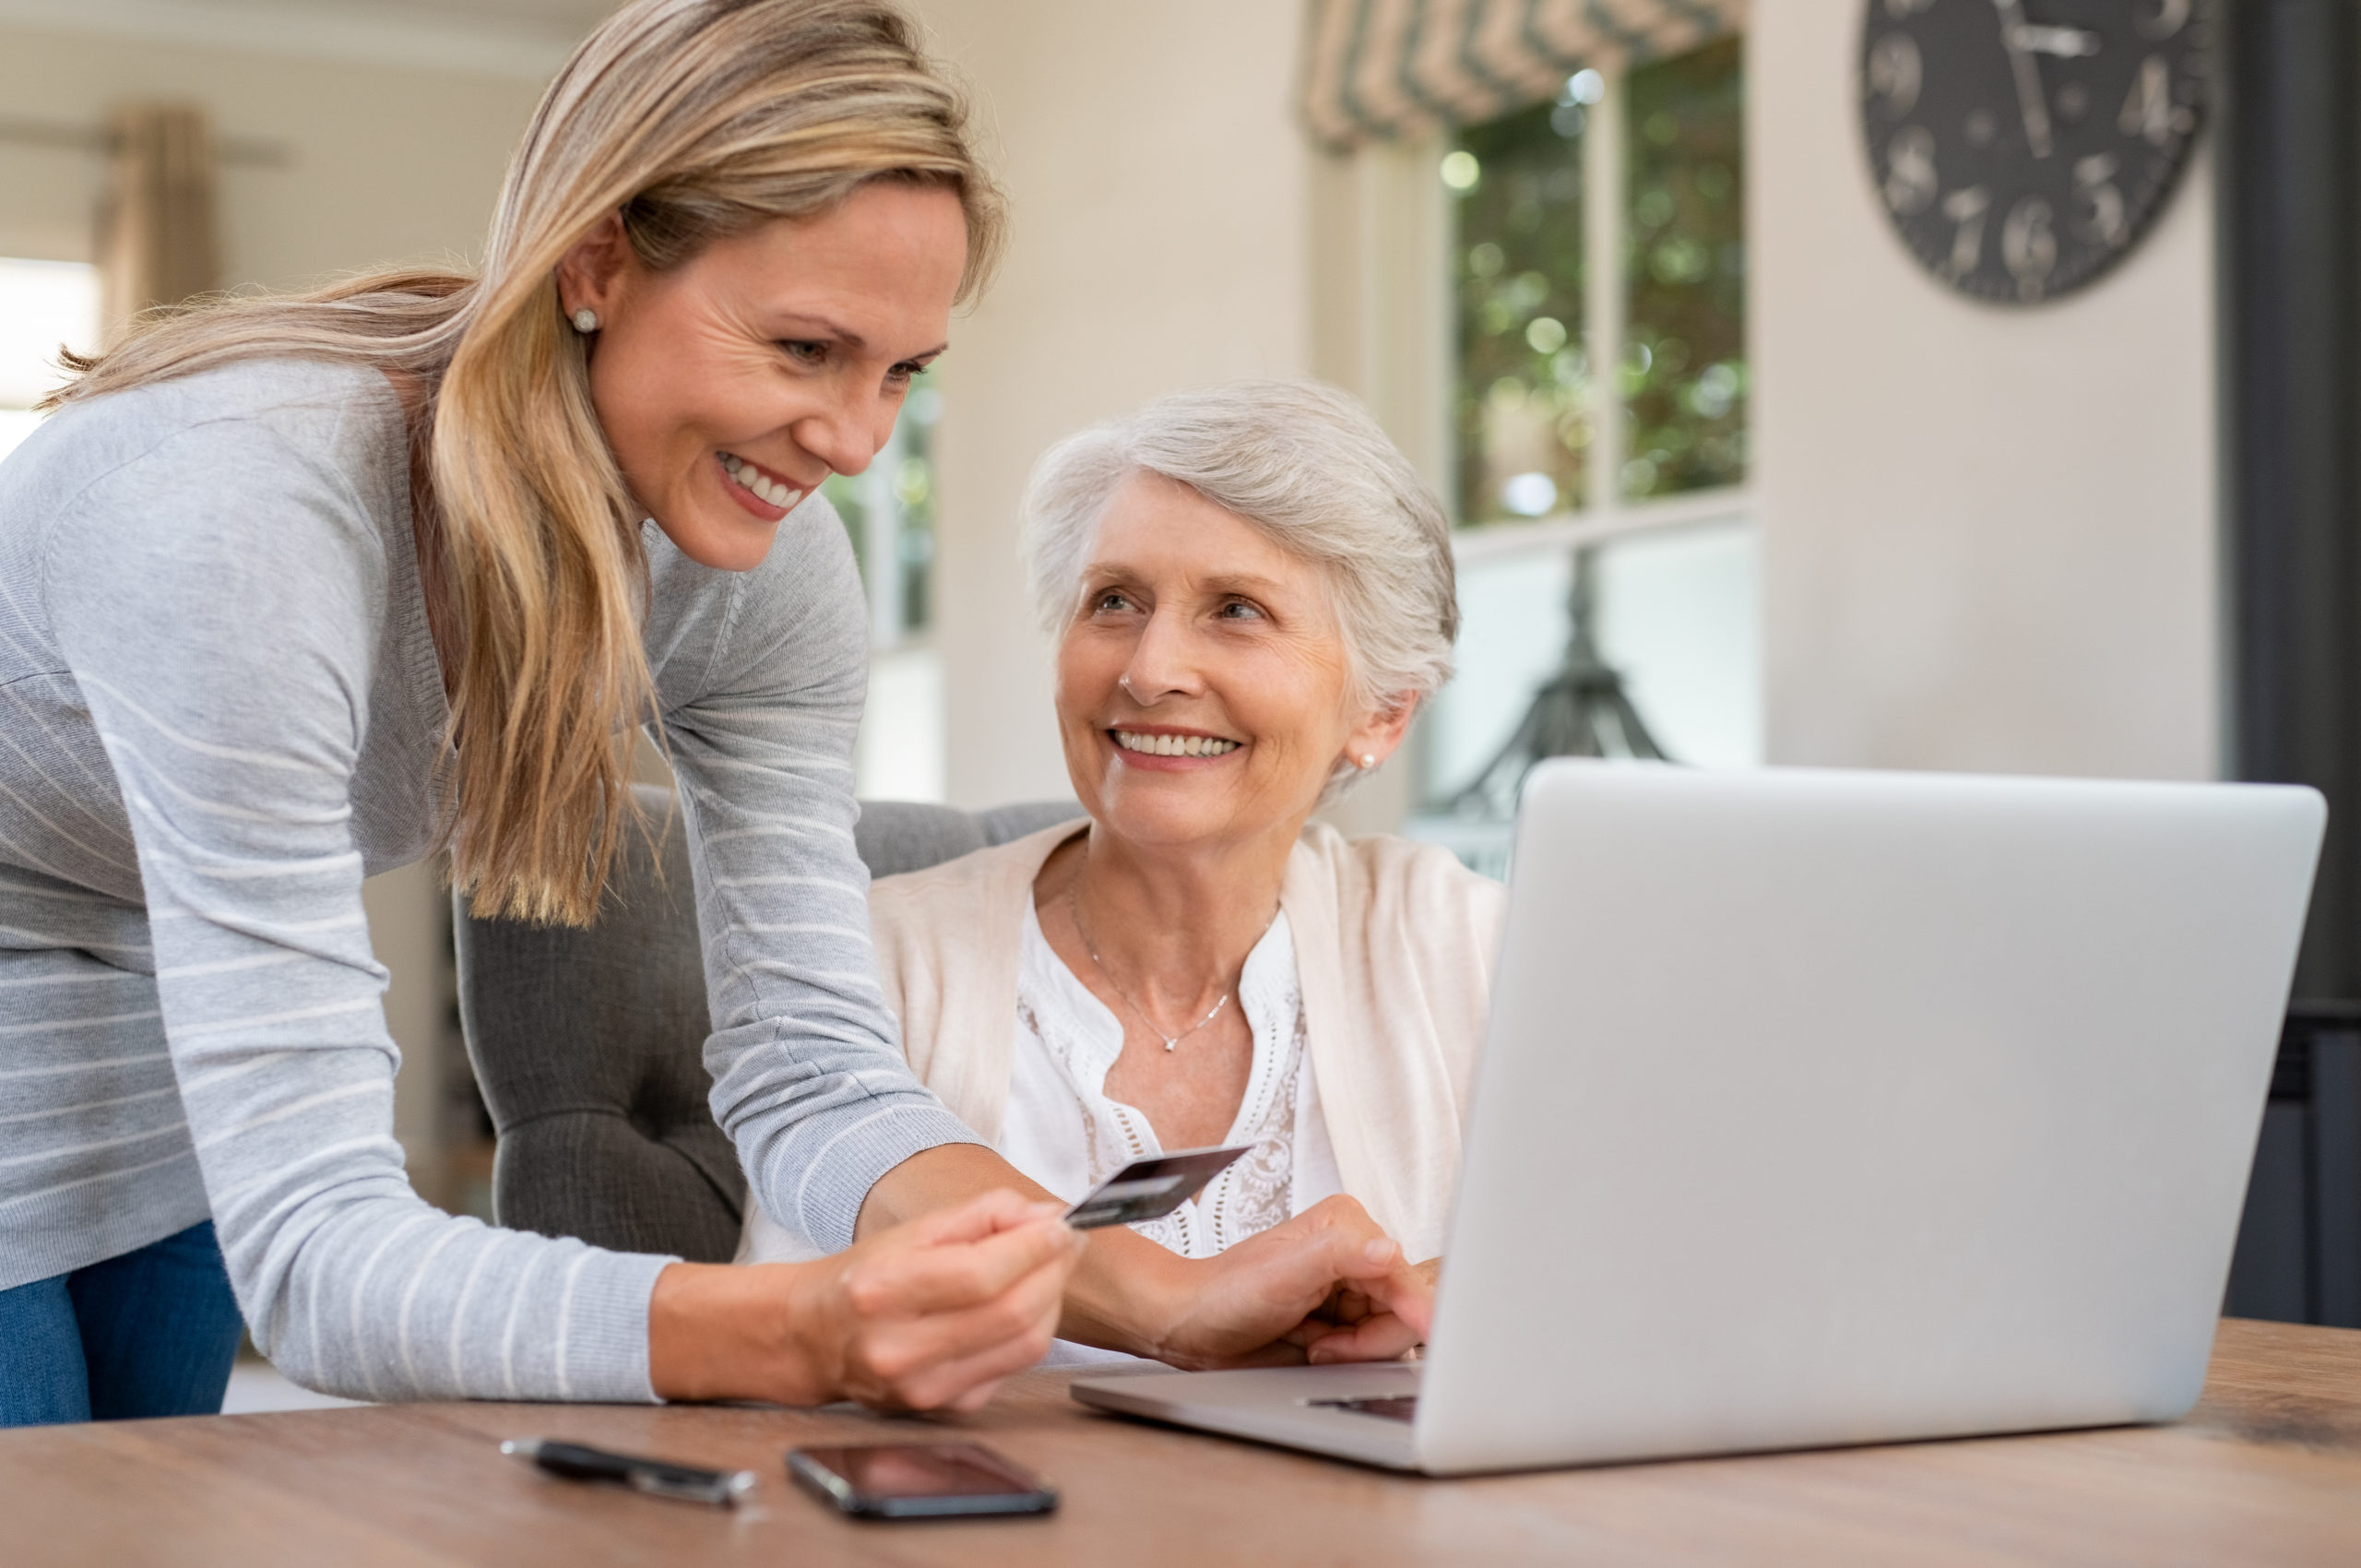 Smiling Mature Woman Making Payment Via Credit Card For Shopping